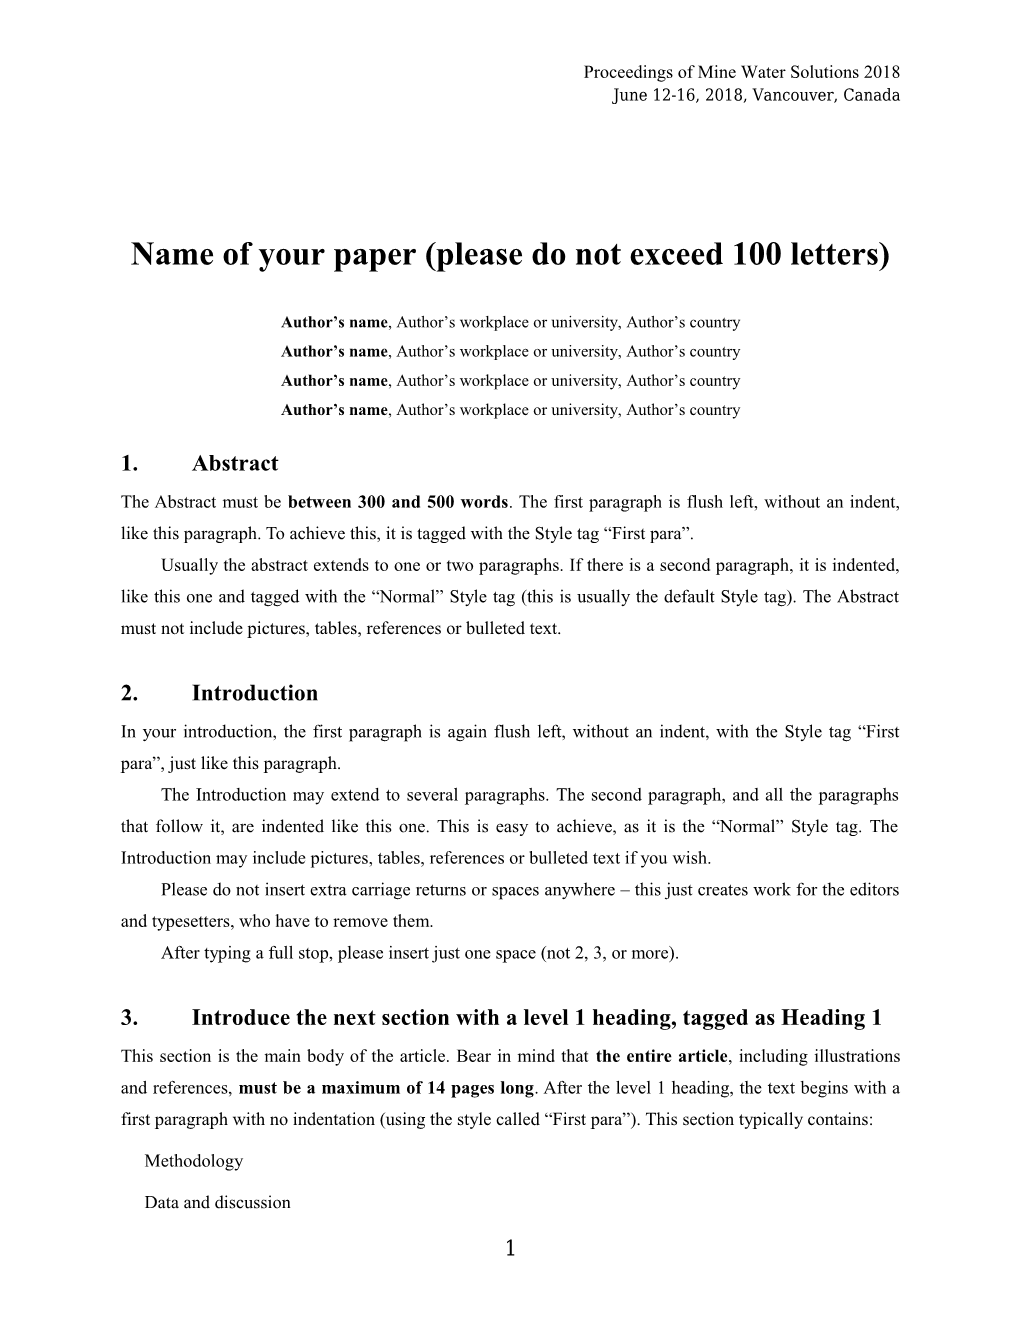 Name of Your Paper (Please Do Not Exceed 100 Letters)